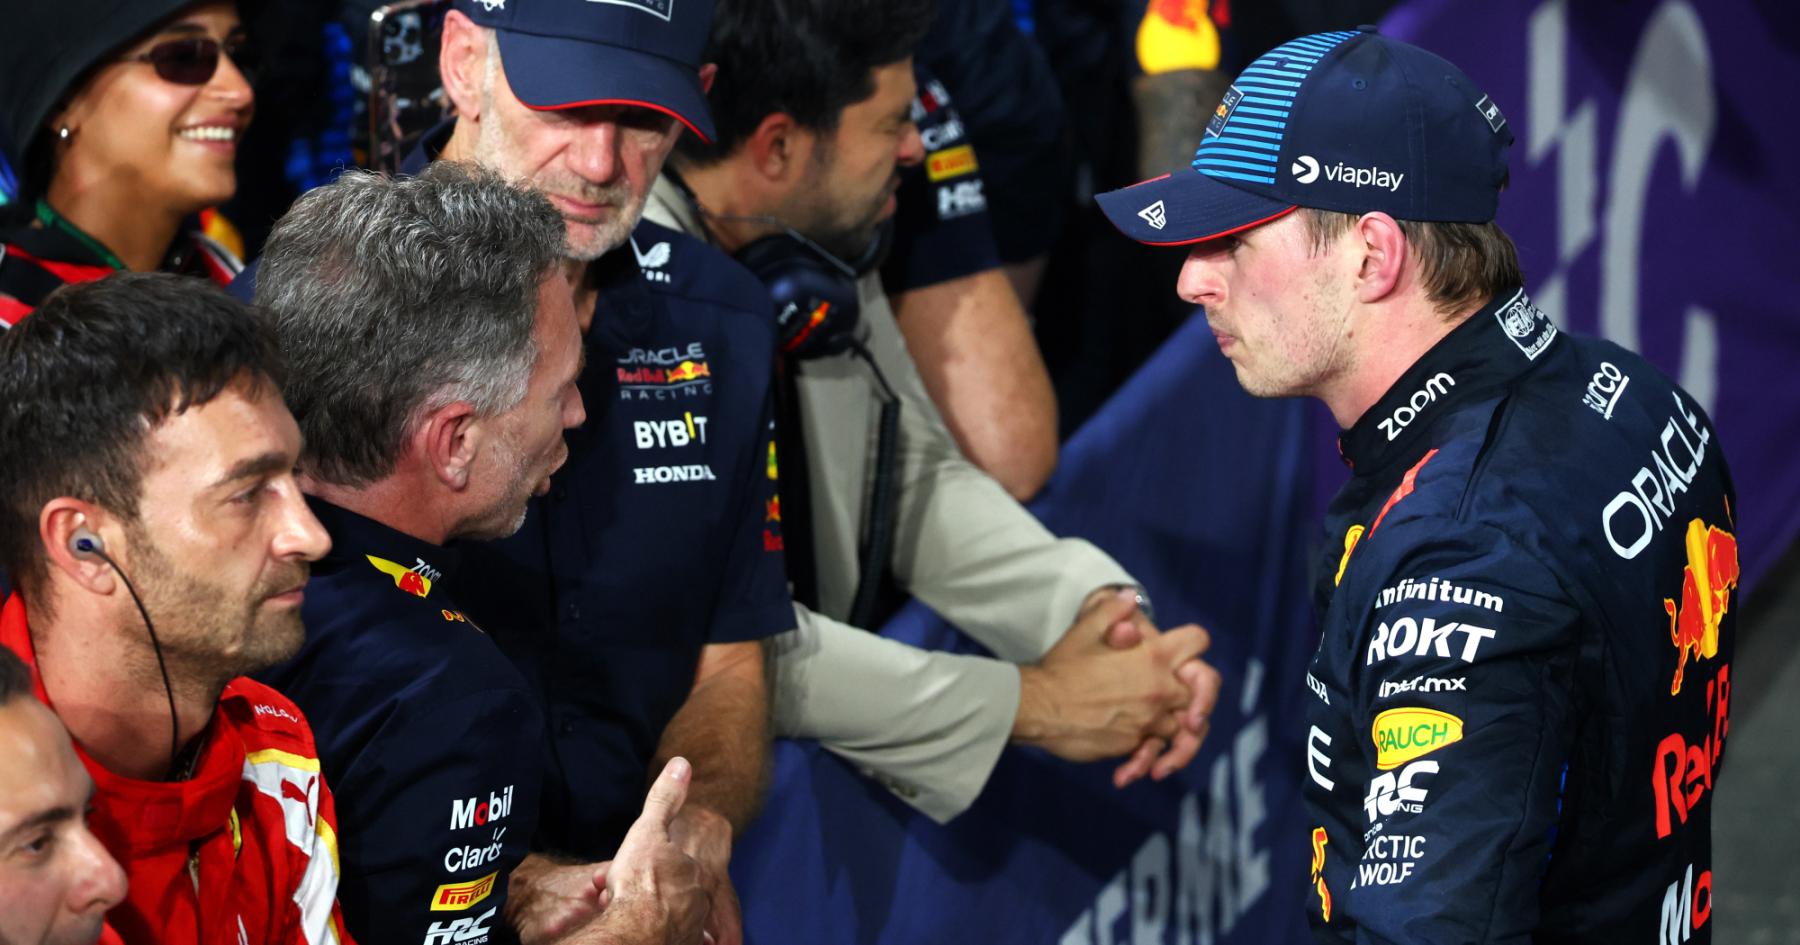 Racing with Resolve: Horner Stands Firm Amid Red Bull Power Struggle and Verstappen Ultimatum